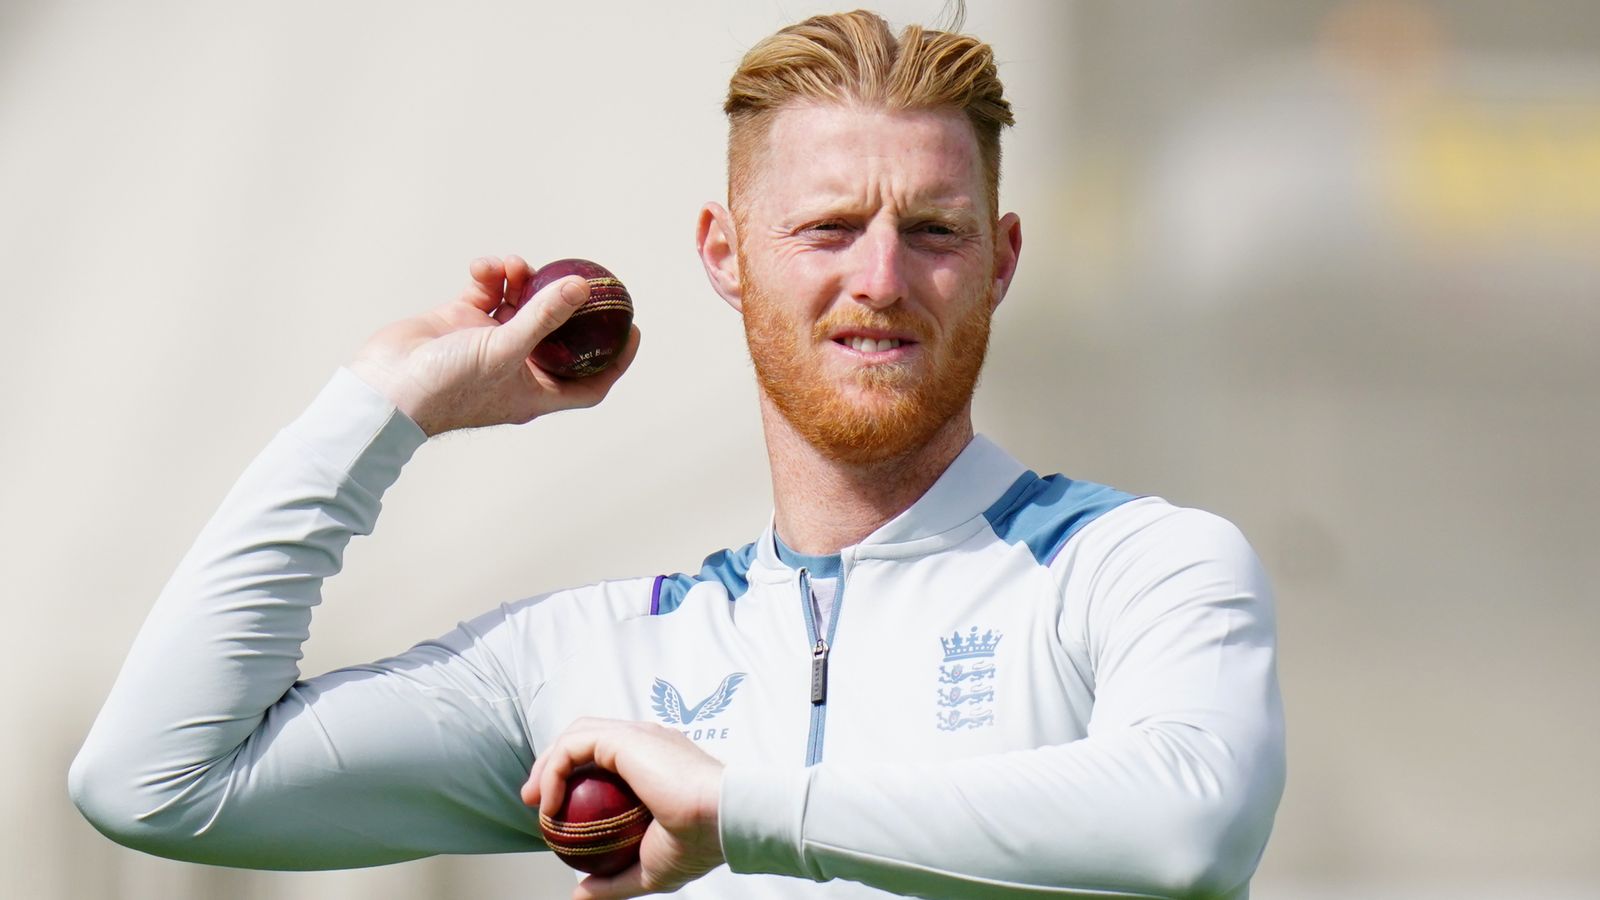 Ben Stokes says England can ‘show the world the talent we have’ under himself and Brendon McCullum